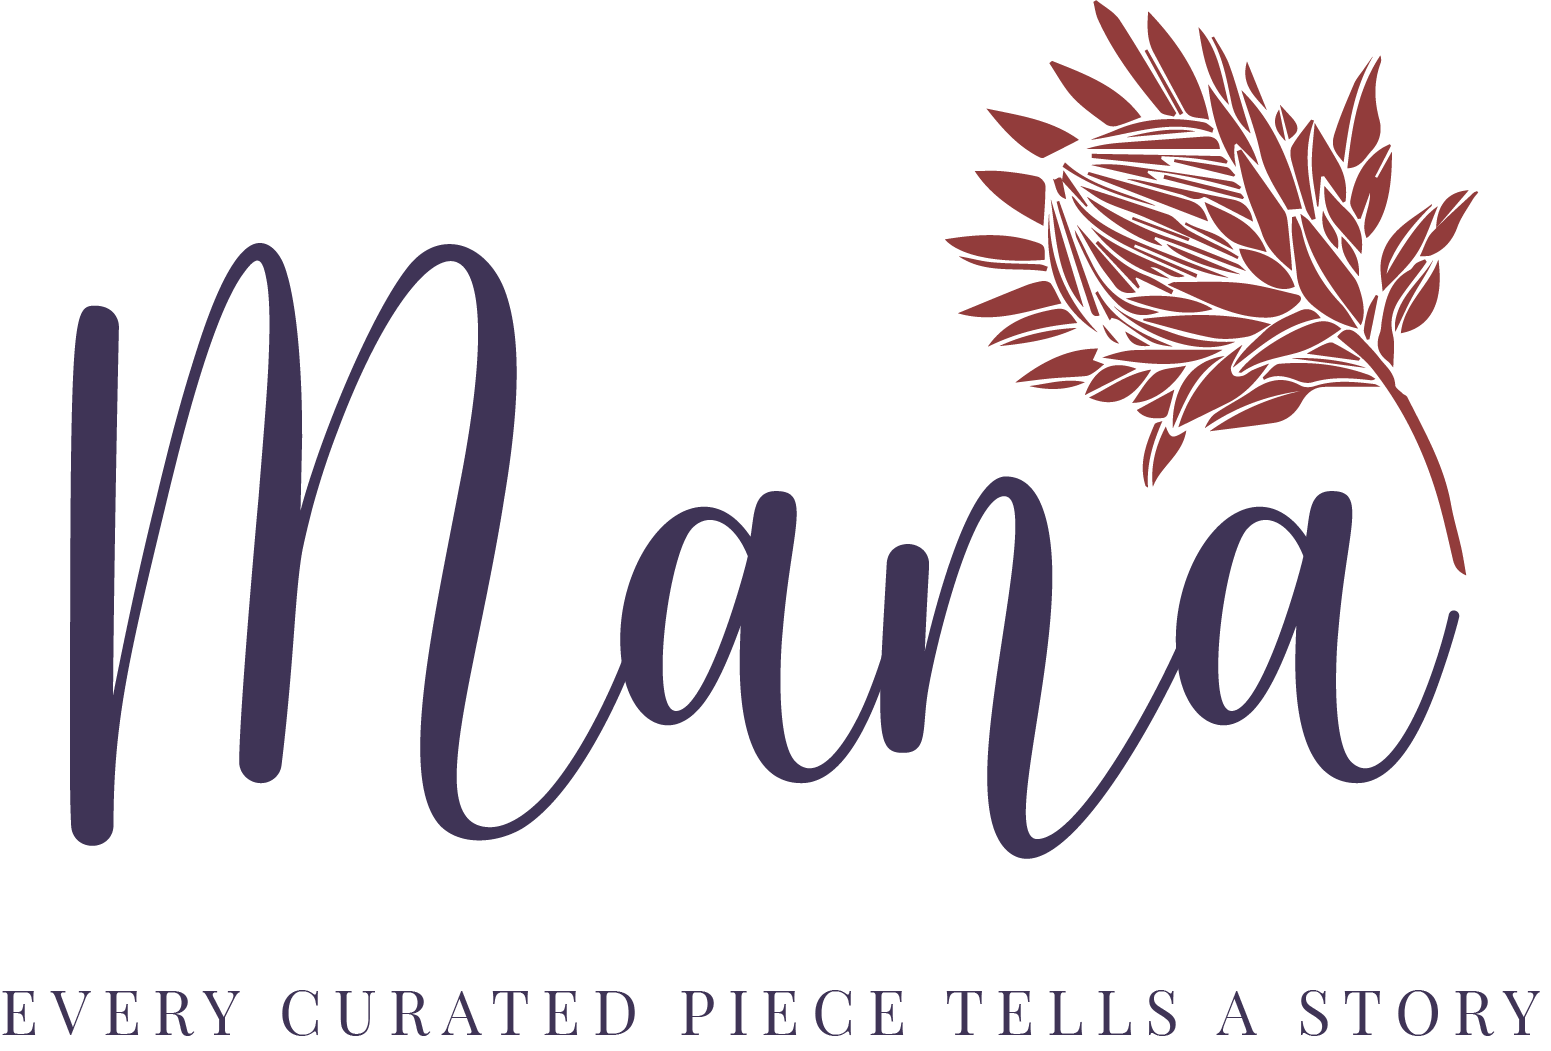 Mana is focused on reviving the livelihood of woman artisans and entrepreneurs impacted by the ongoing pandemic. Mana offers a quarterly subscription box featuring handcrafted, one-of-a-kind pieces created by local women artisans in South Africa and the United States. These items are created exclusively for the Mana boxes.
